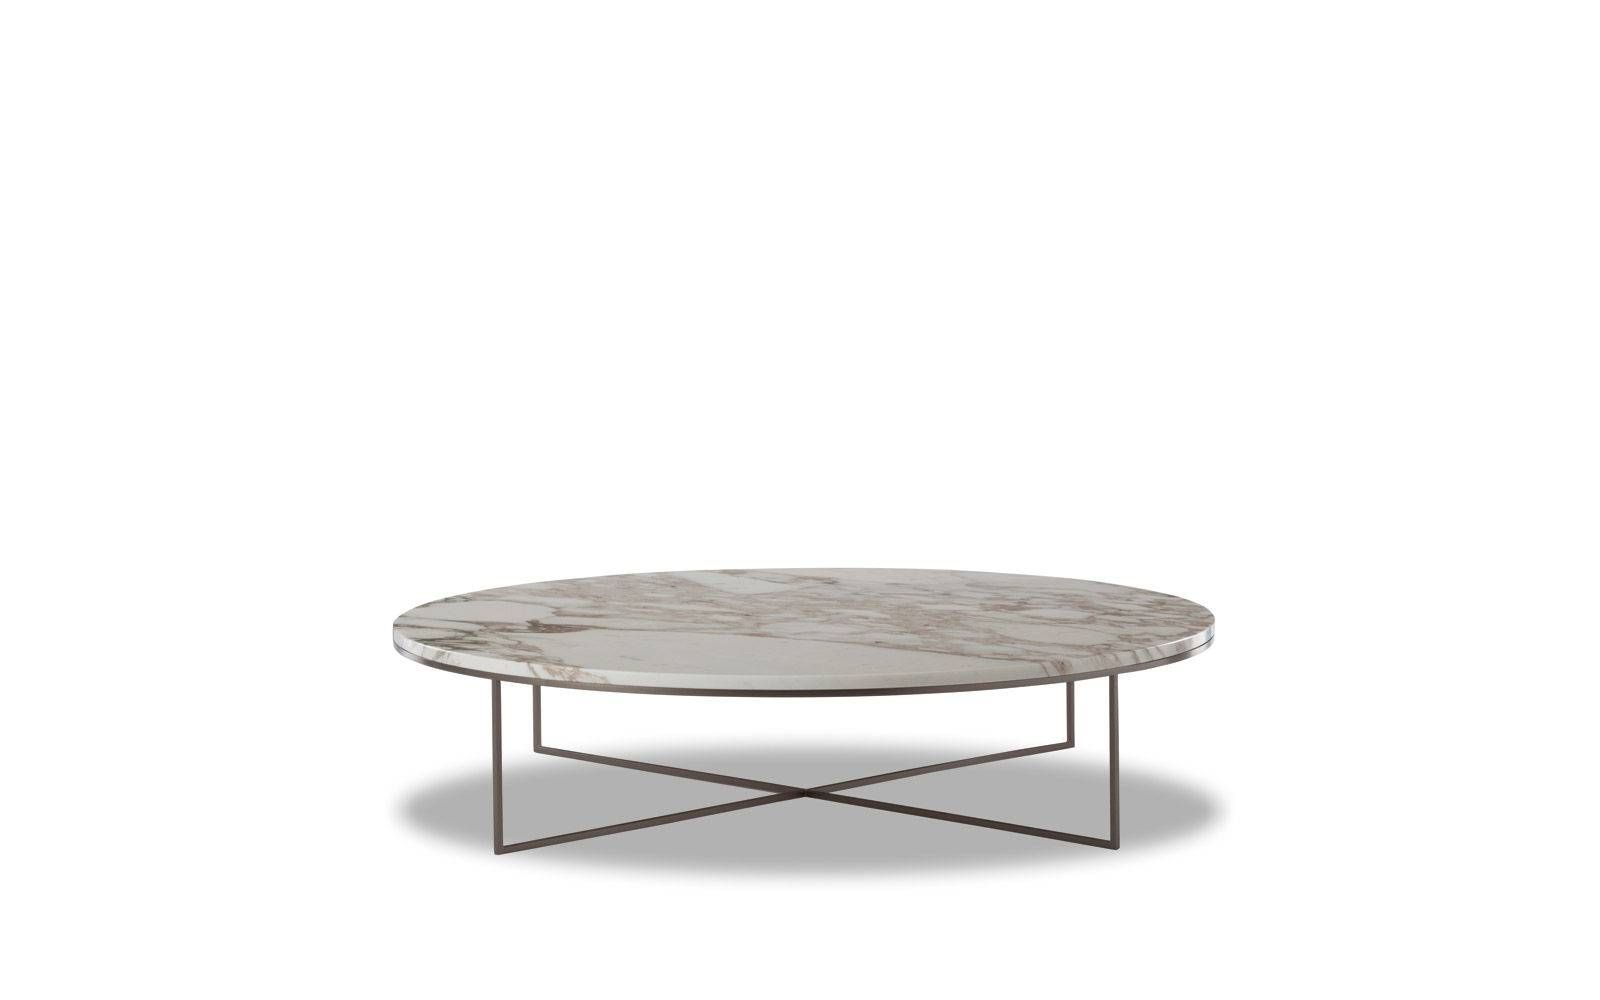 Calder "bronze" | Coffee Tables – En Pertaining To Bronze Coffee Tables (View 7 of 30)